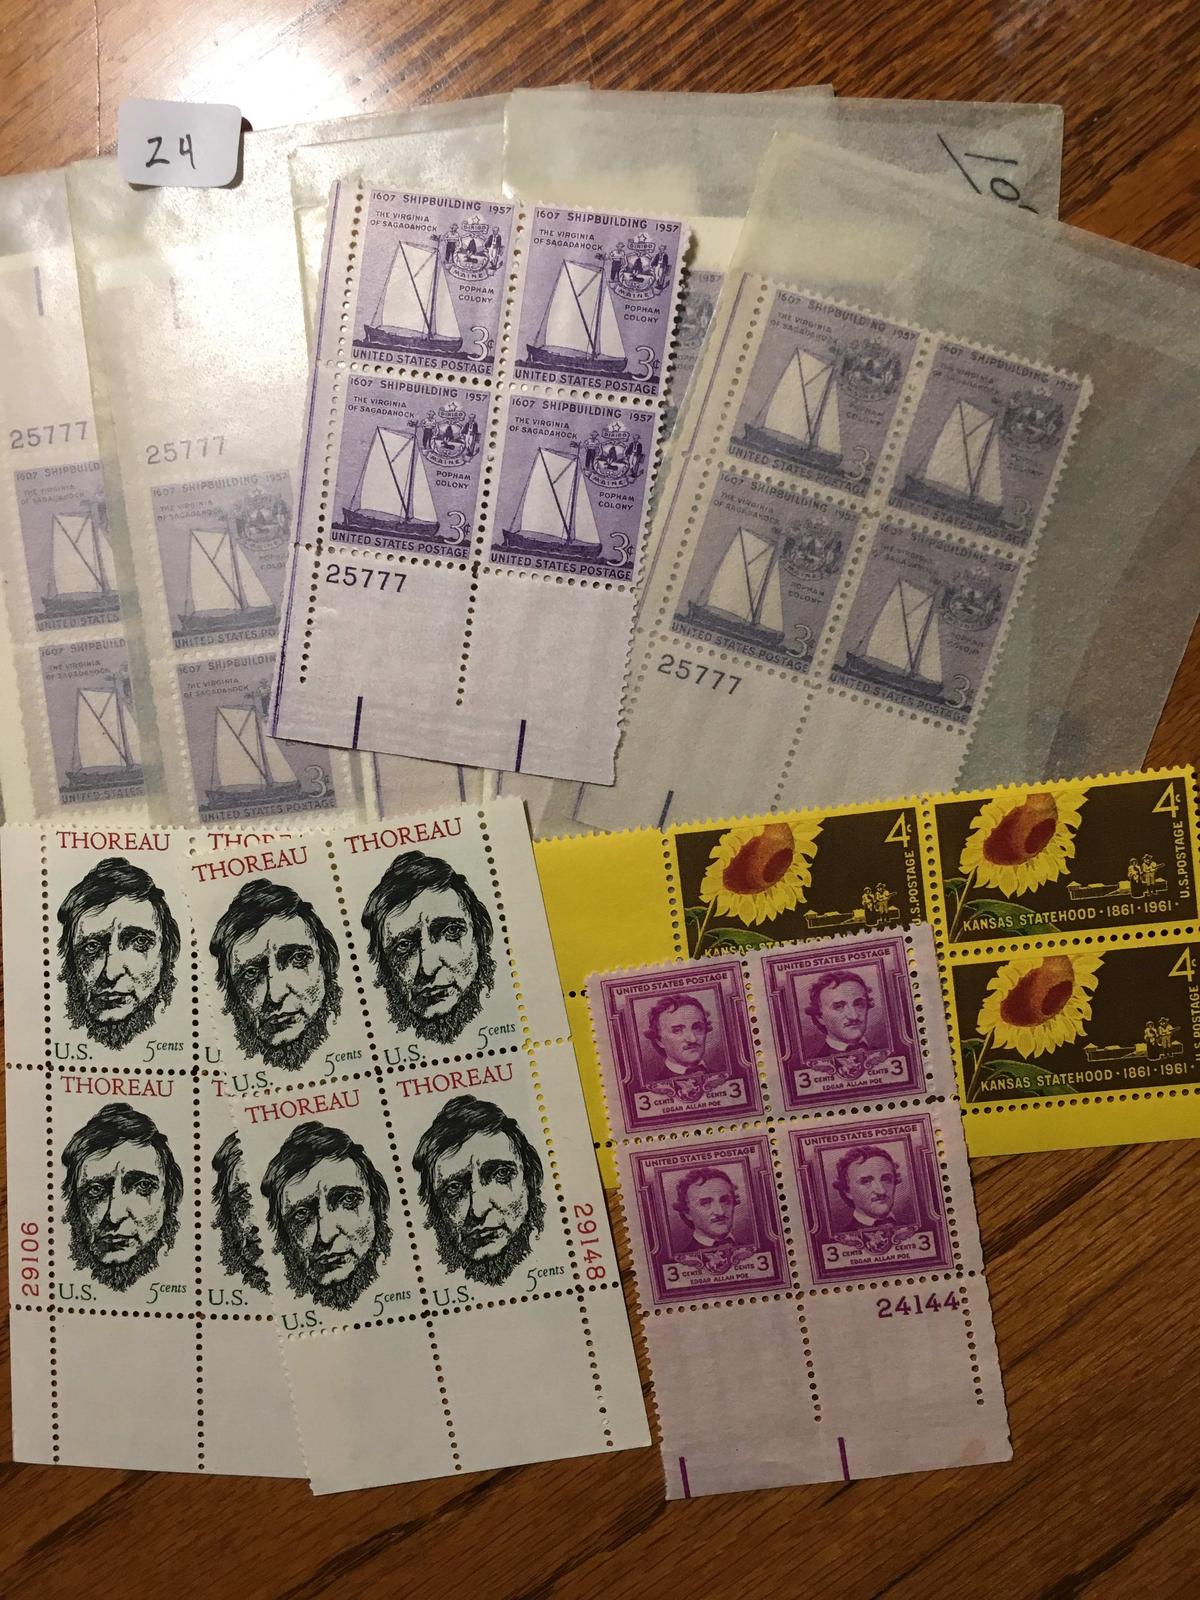 United States Mint Postage Stamps